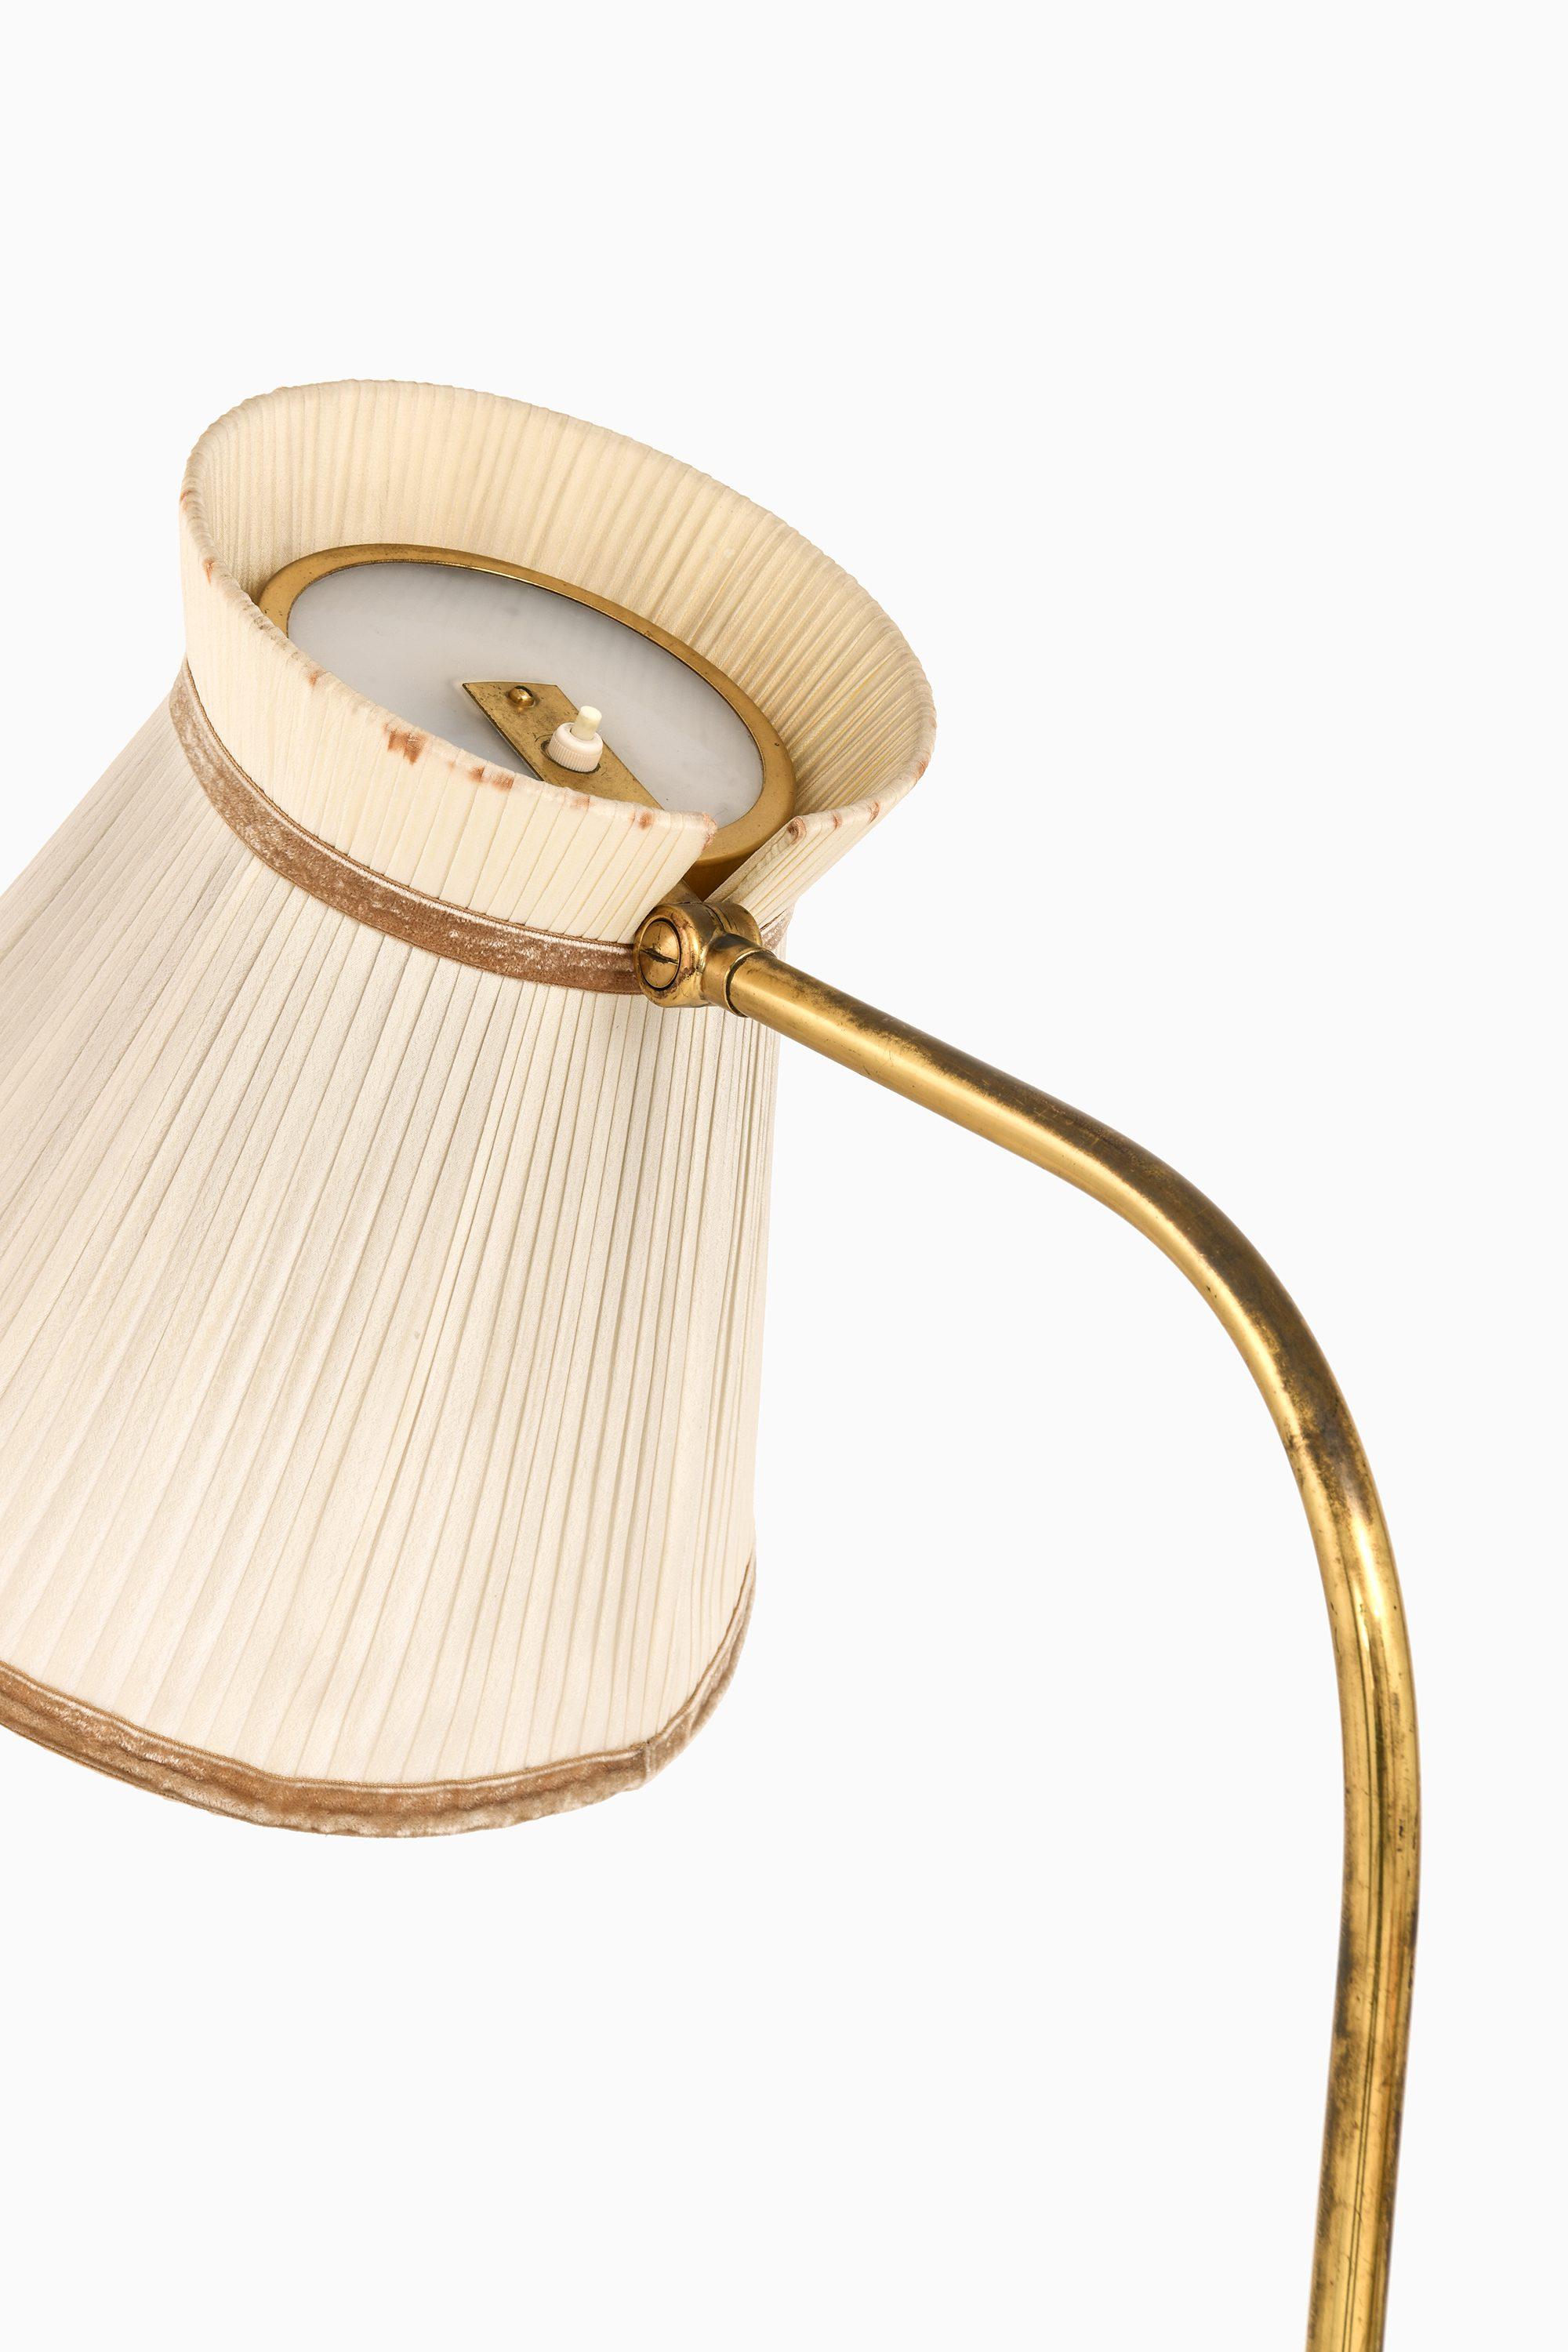 Scandinavian Modern Floor Lamp in Brass, Leather and Linen Shade by Lisa Johansson-Pape, 1940’s For Sale